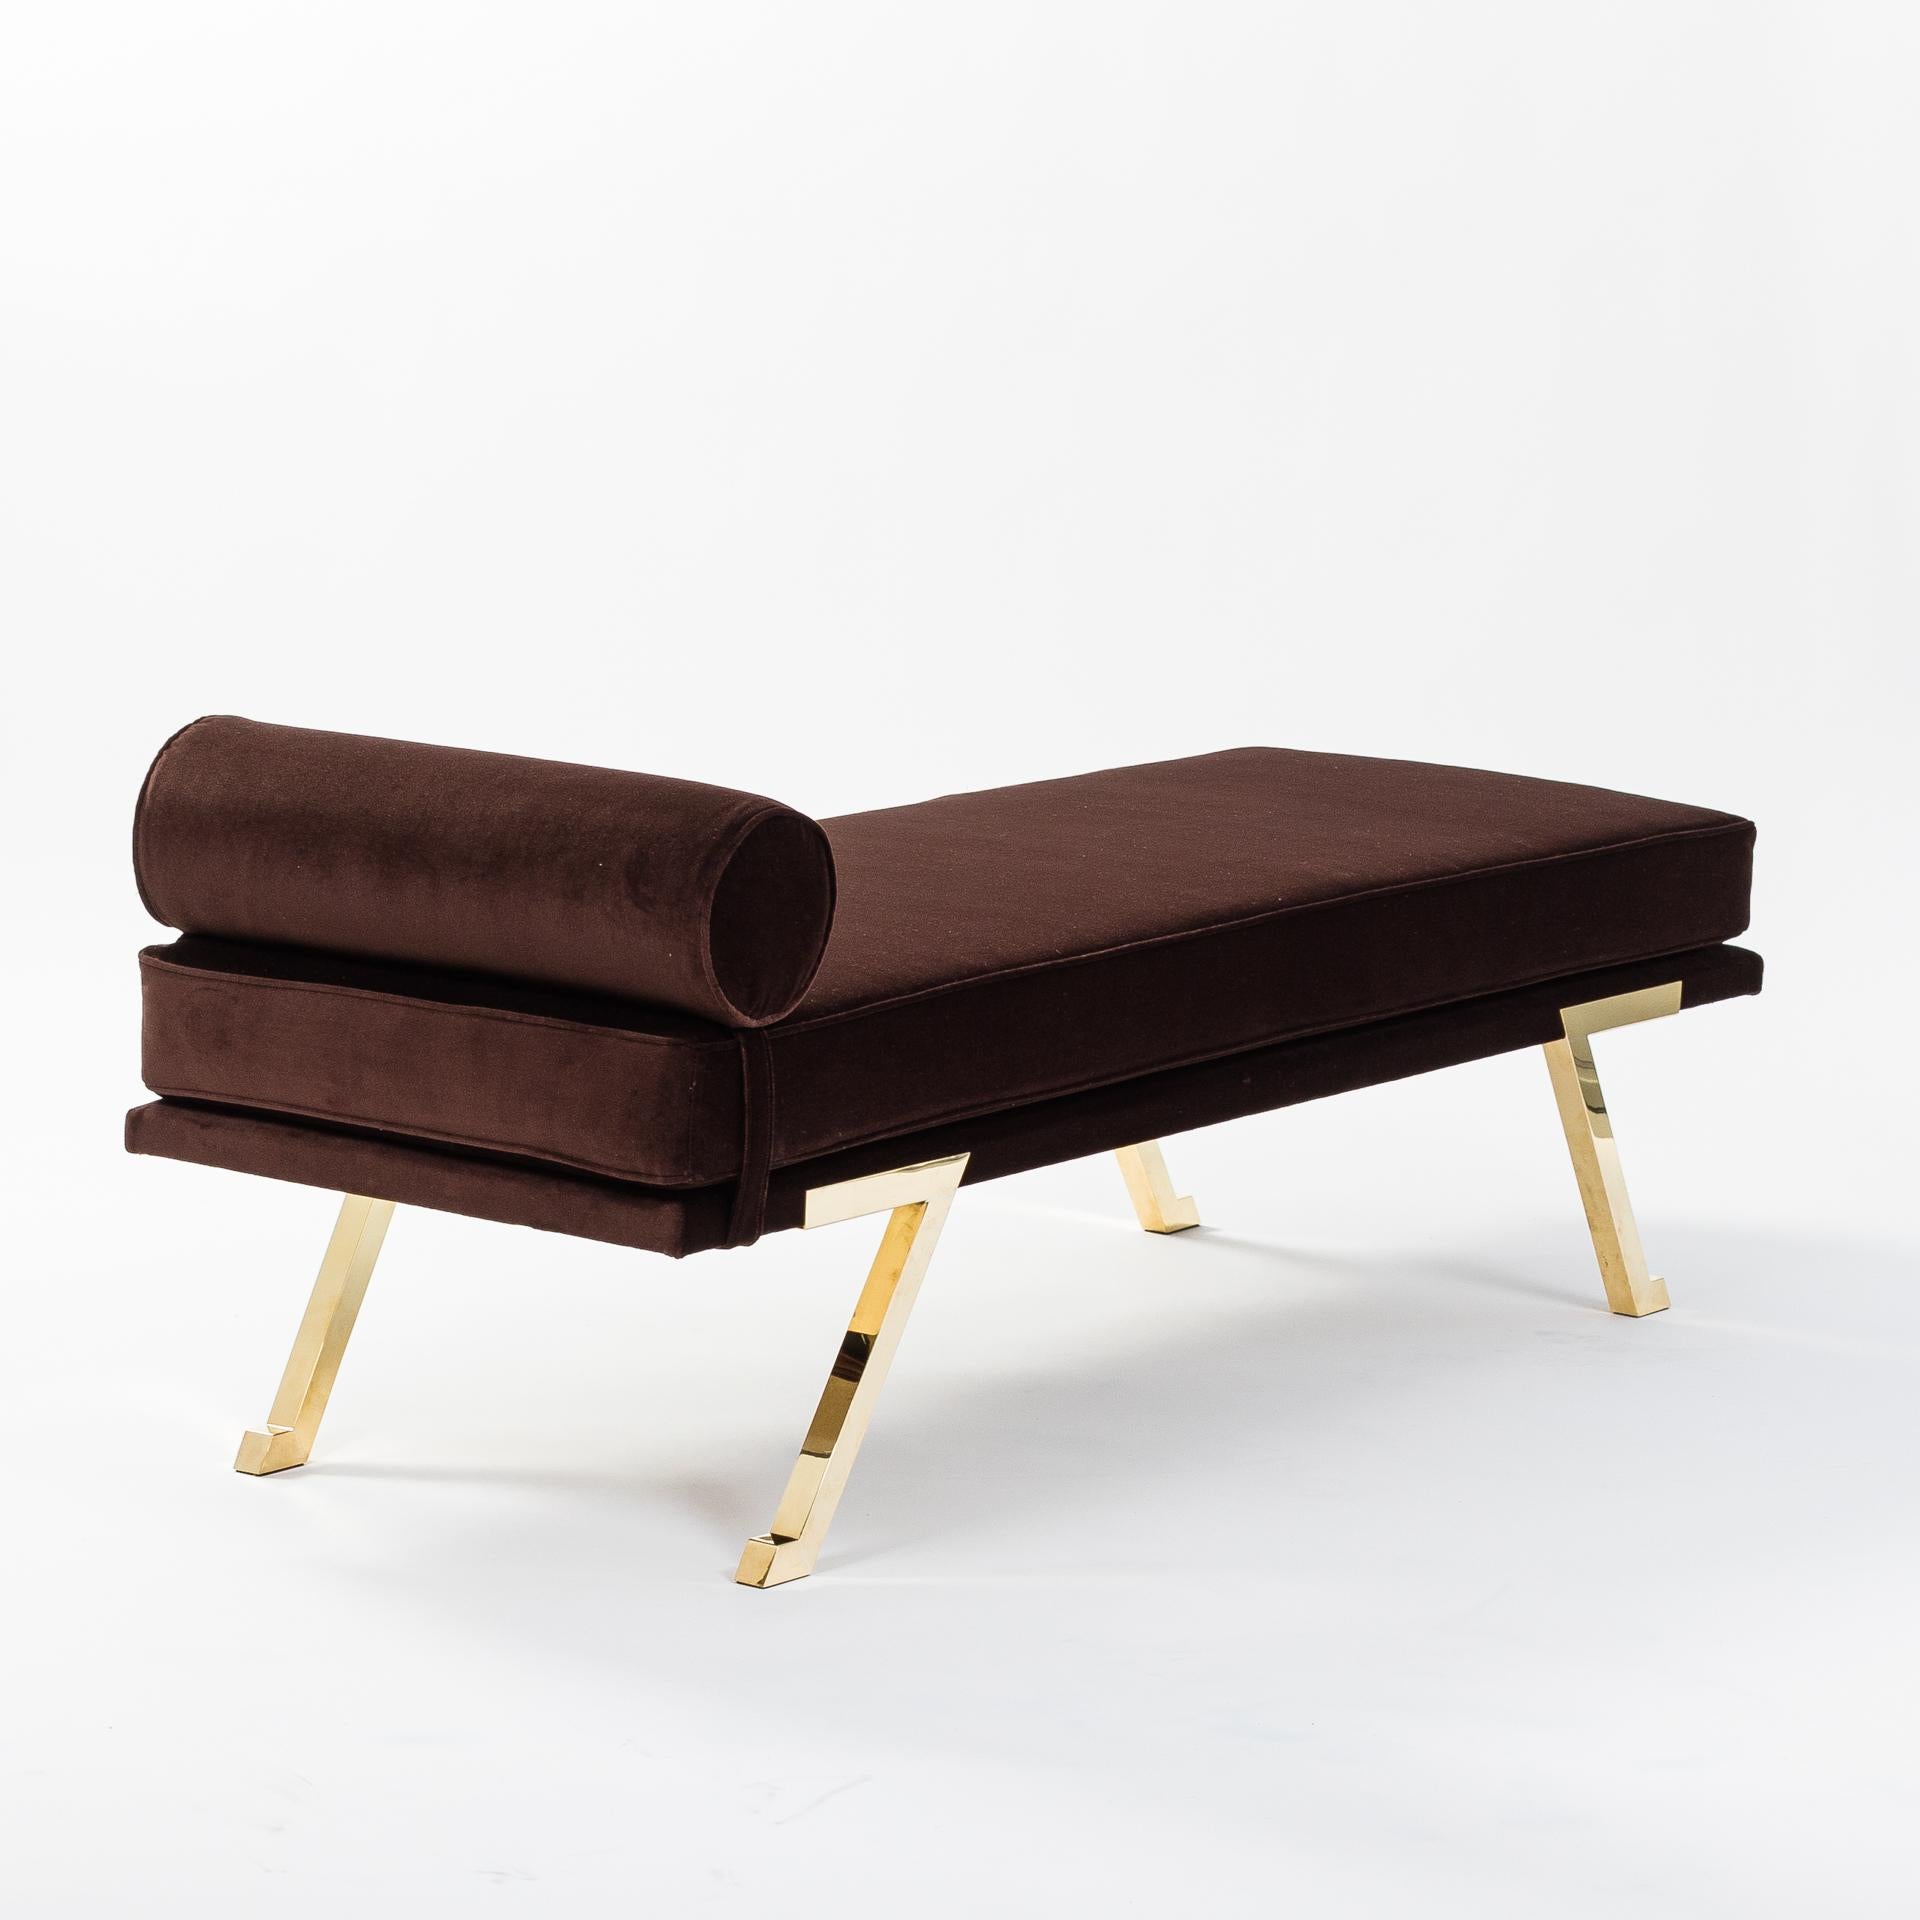 Late 20th Century Italian Mid-Century Daybed / Bench Brass Legs, Chocolate Brown Velvet 1970s For Sale